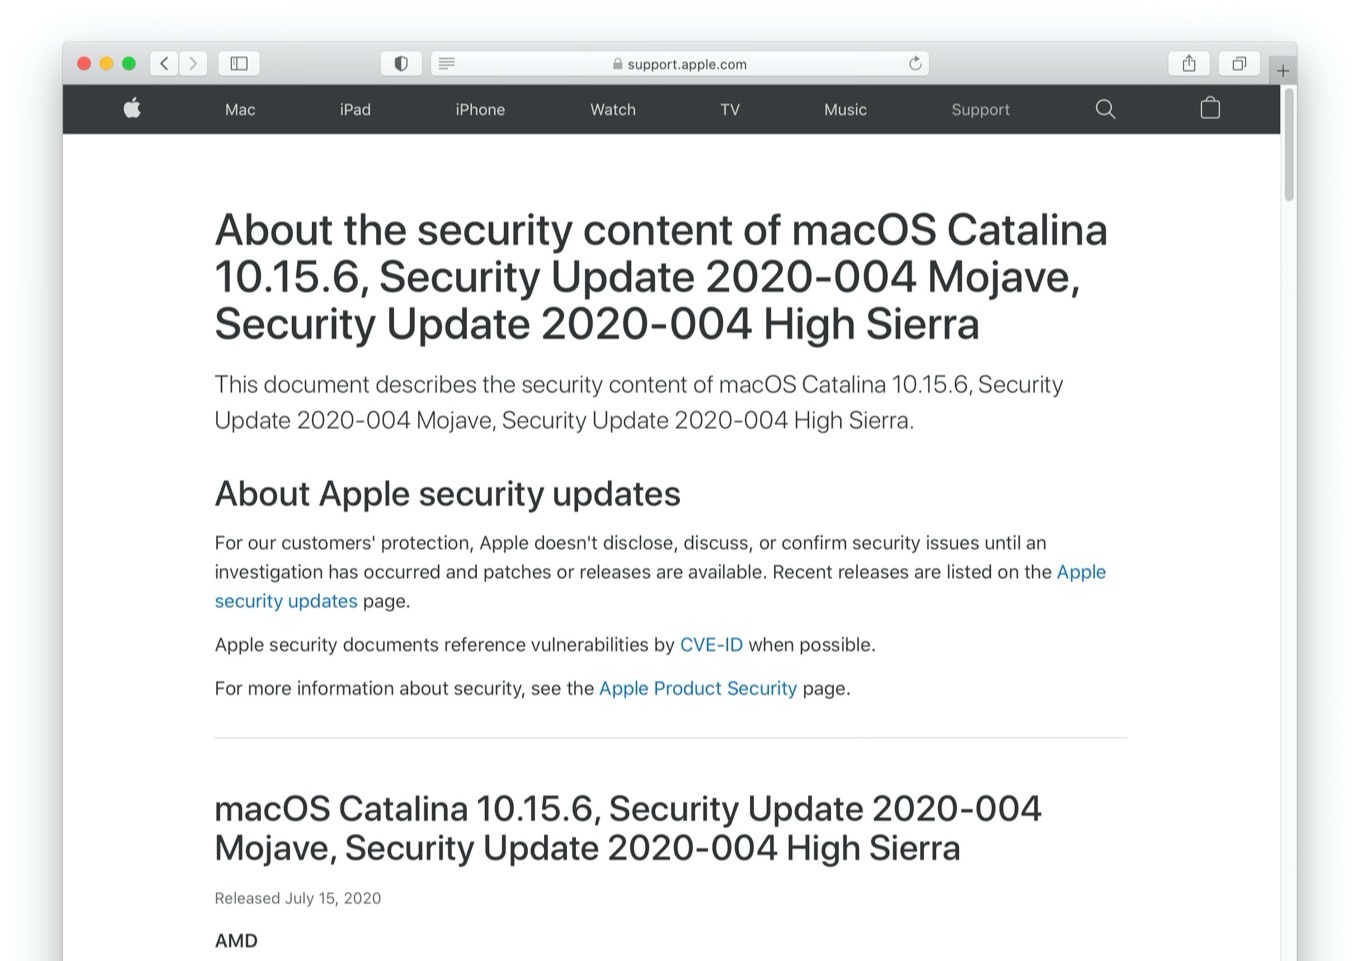 About the security content of macOS Catalina 10.15.6, Security Update 2020-004 Mojave, Security Update 2020-004 High Sierra